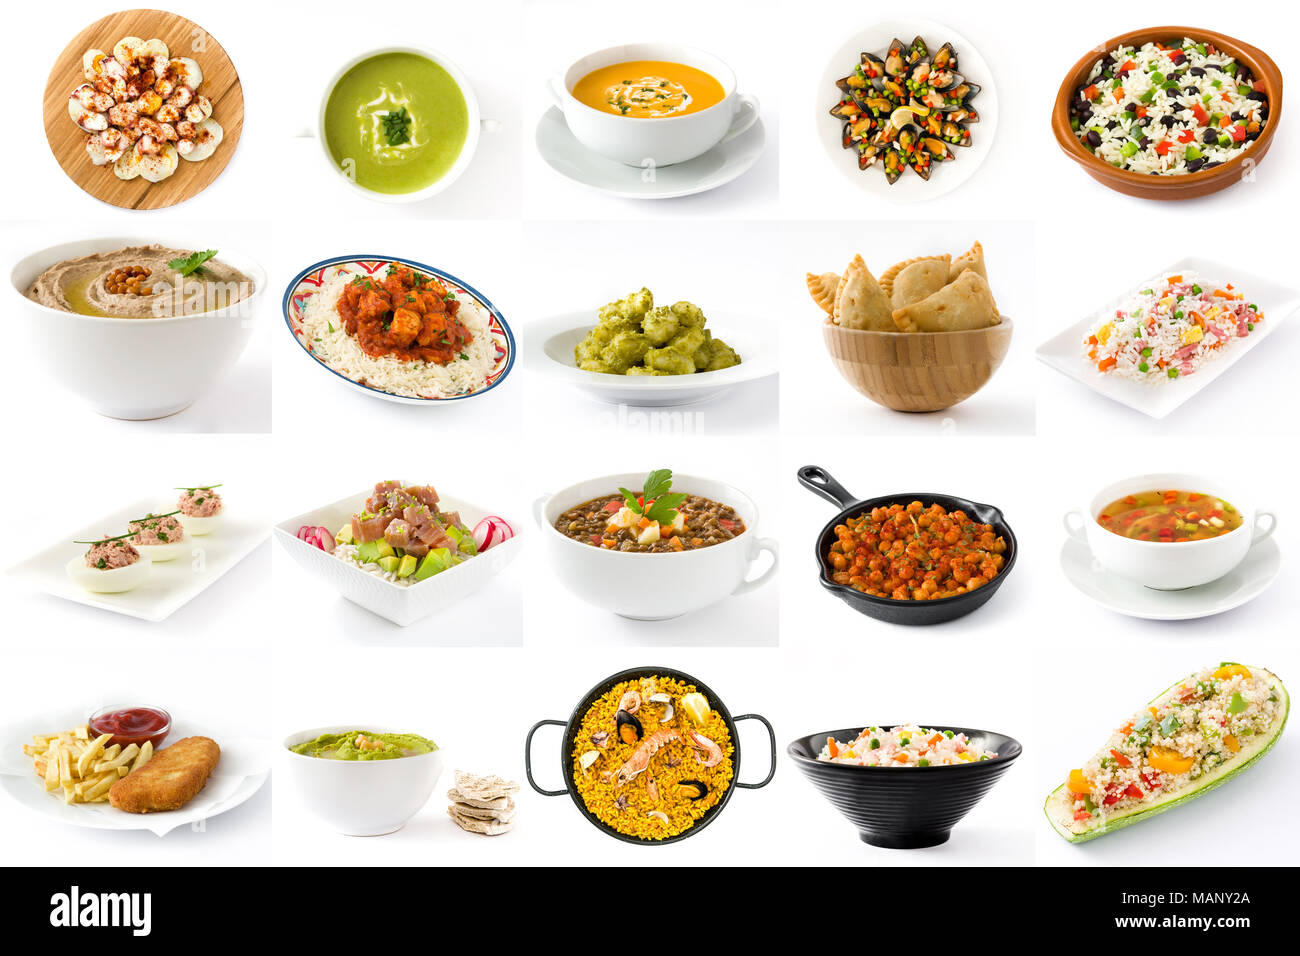 Food around the world collage isolated on white background Stock Photo